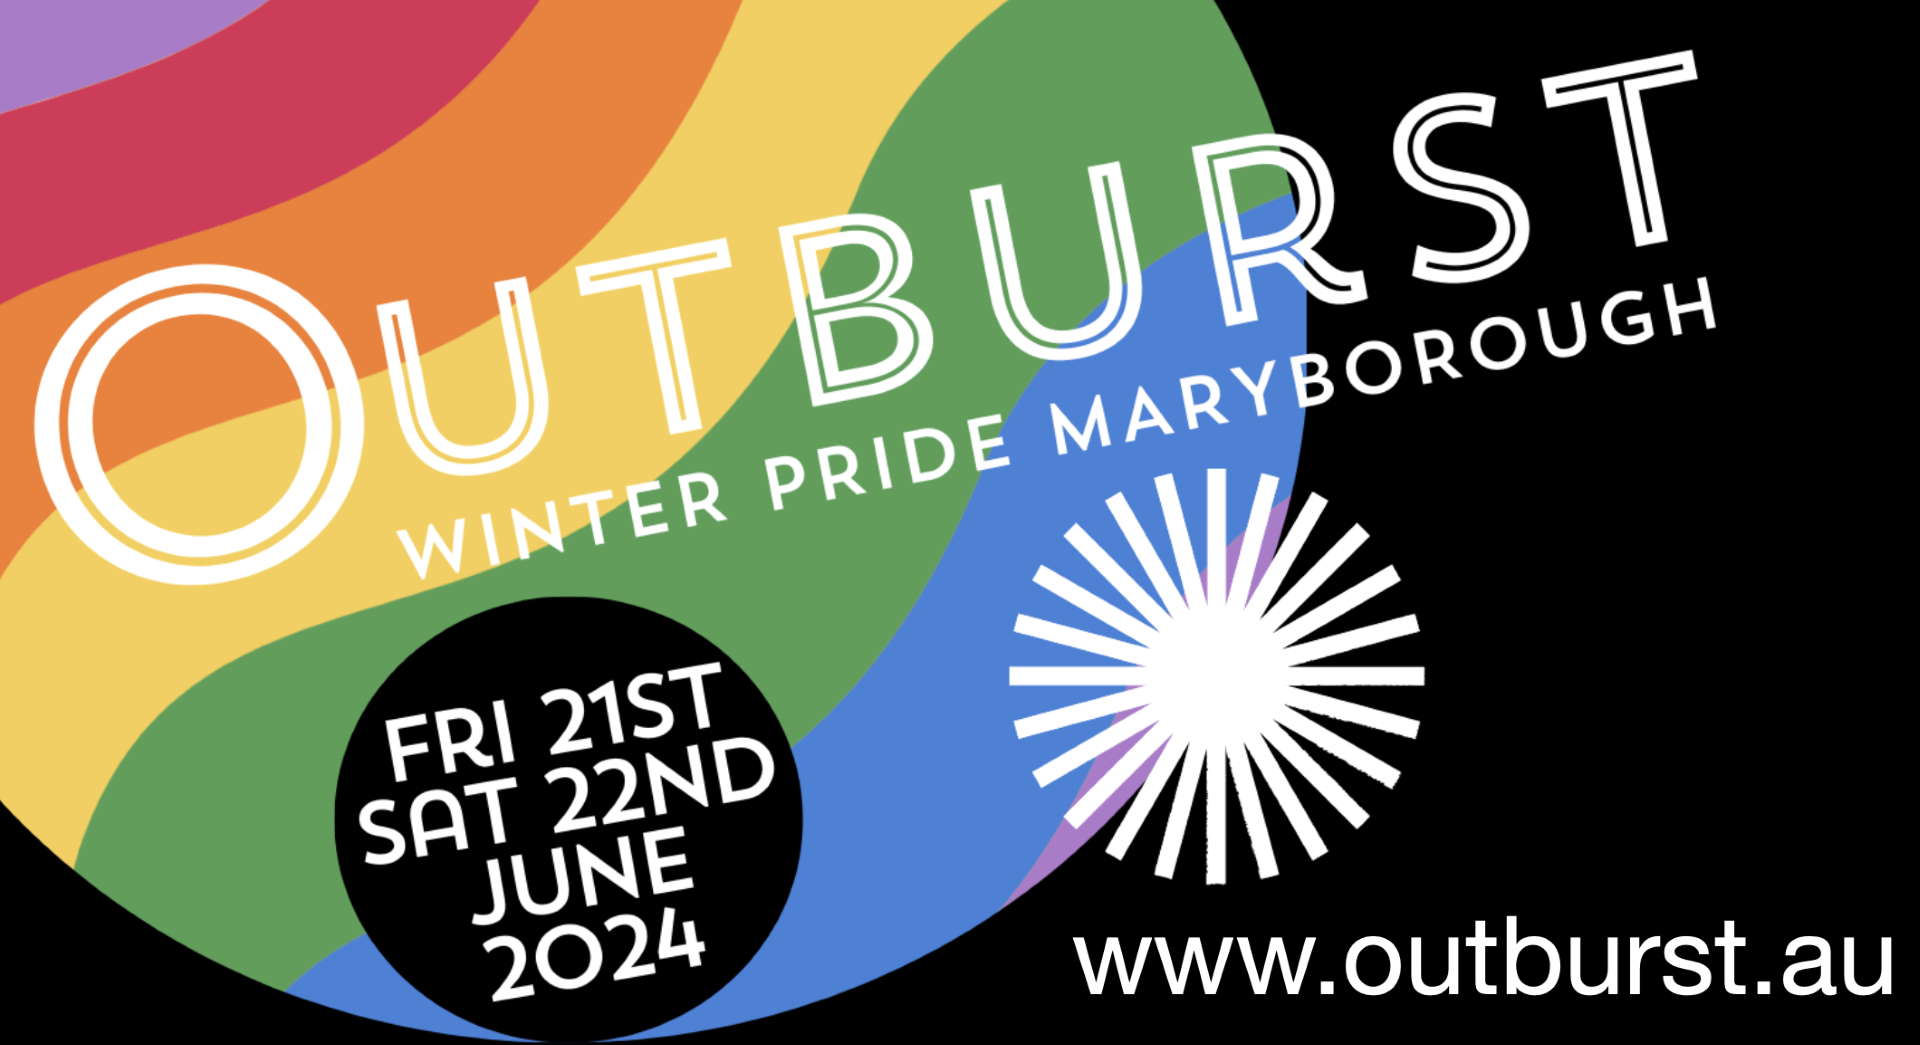 Outburst Winter Pride Maryborough poster with date and url